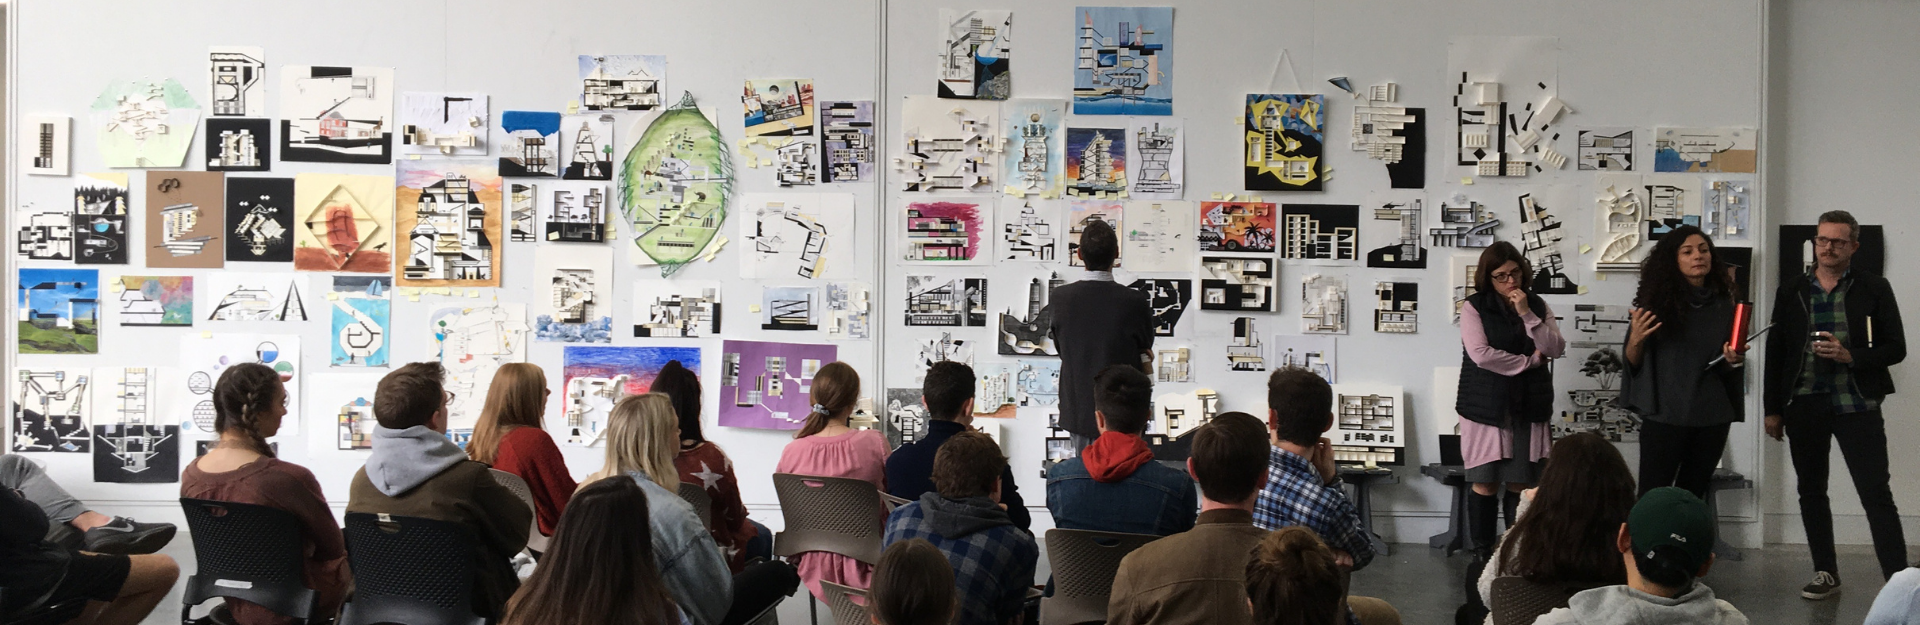 architecture studio review with students and professors